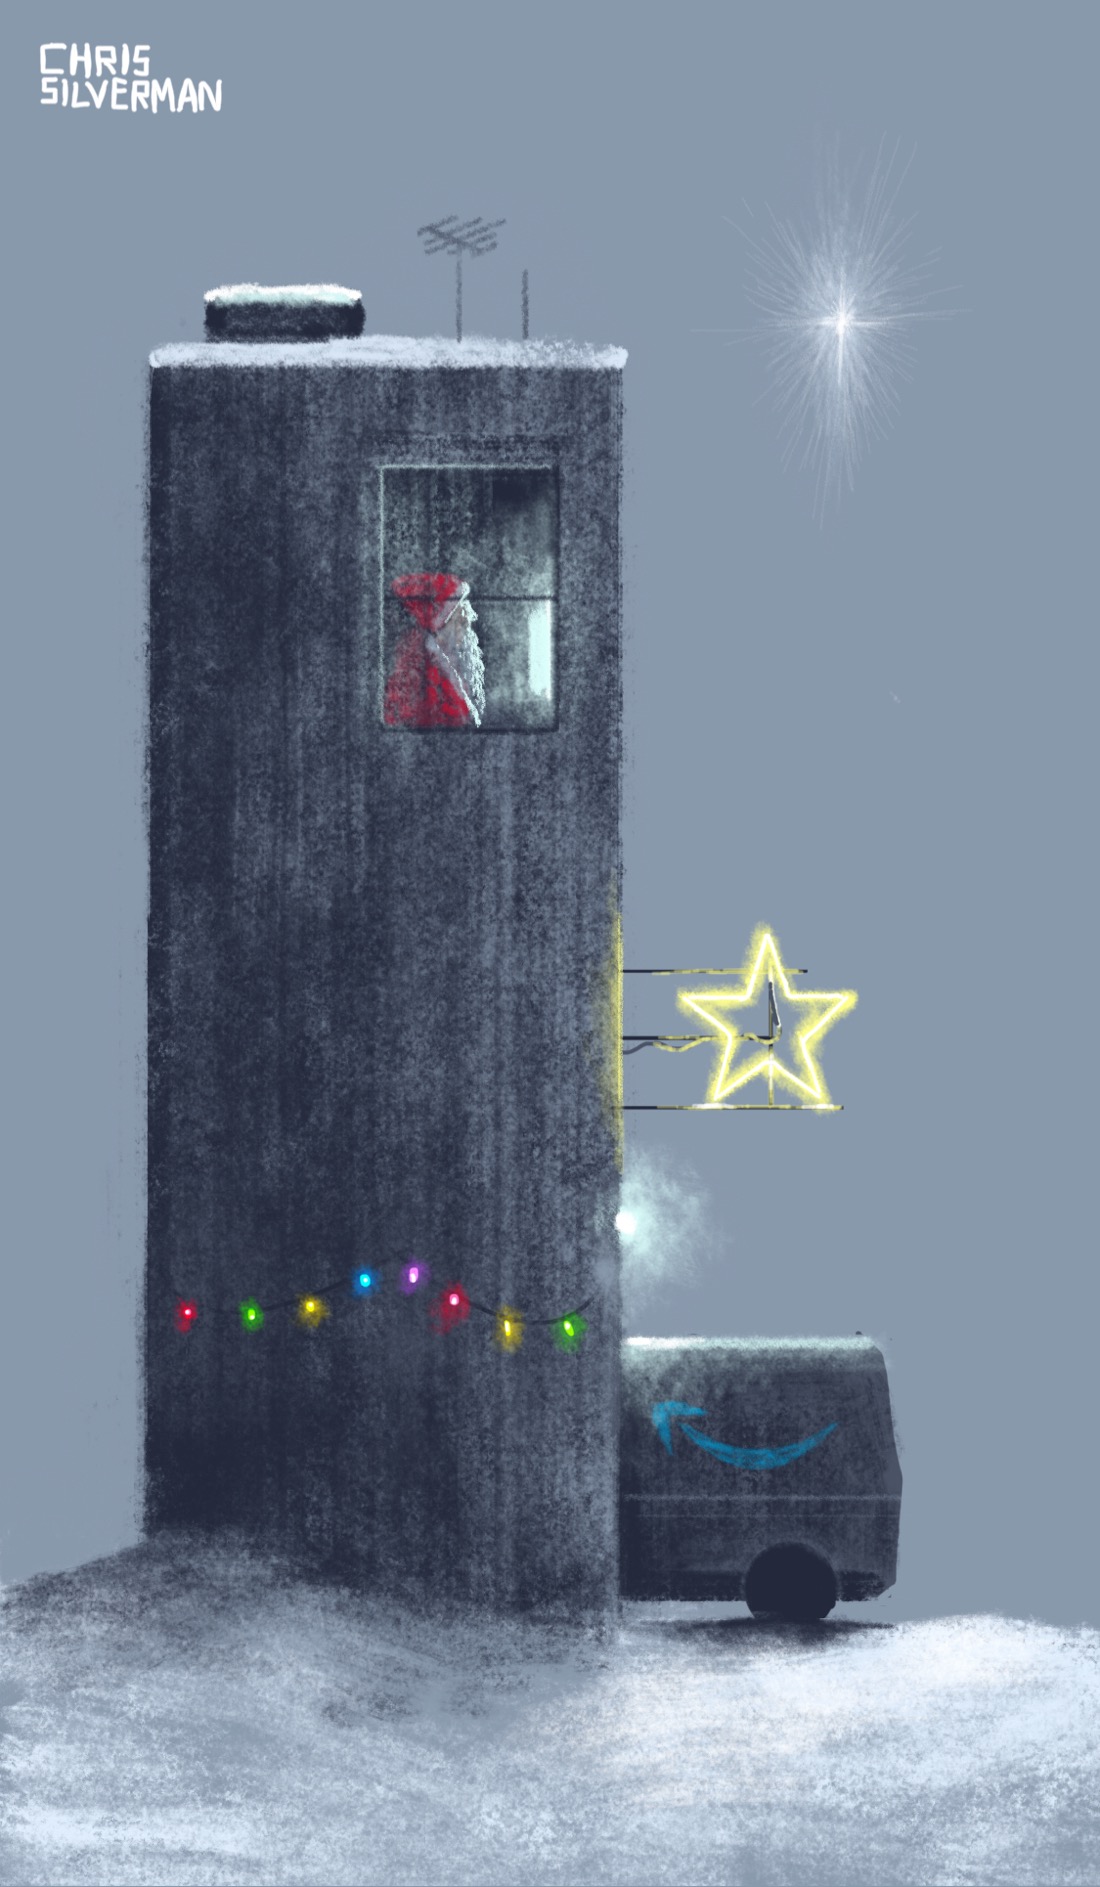 A slate-gray night sky, almost completely overcast. The ground is covered in gray snow. A narrow, concrete building, perhaps two stories, stands in the middle of the scene. It has only one window set at the top. Sitting in the window, bathed in the glow of a screen, is Santa Claus. Extending from the right side of the building are several wire poles supporting a glowing neon star. Hung at the base of the building is a desolate string of colored Christmas lights. Parked behind the building is an Amazon delivery van. A single bright star is visible in the top right of the sky. This is mostly a gray drawing; the building and van are dark gray.